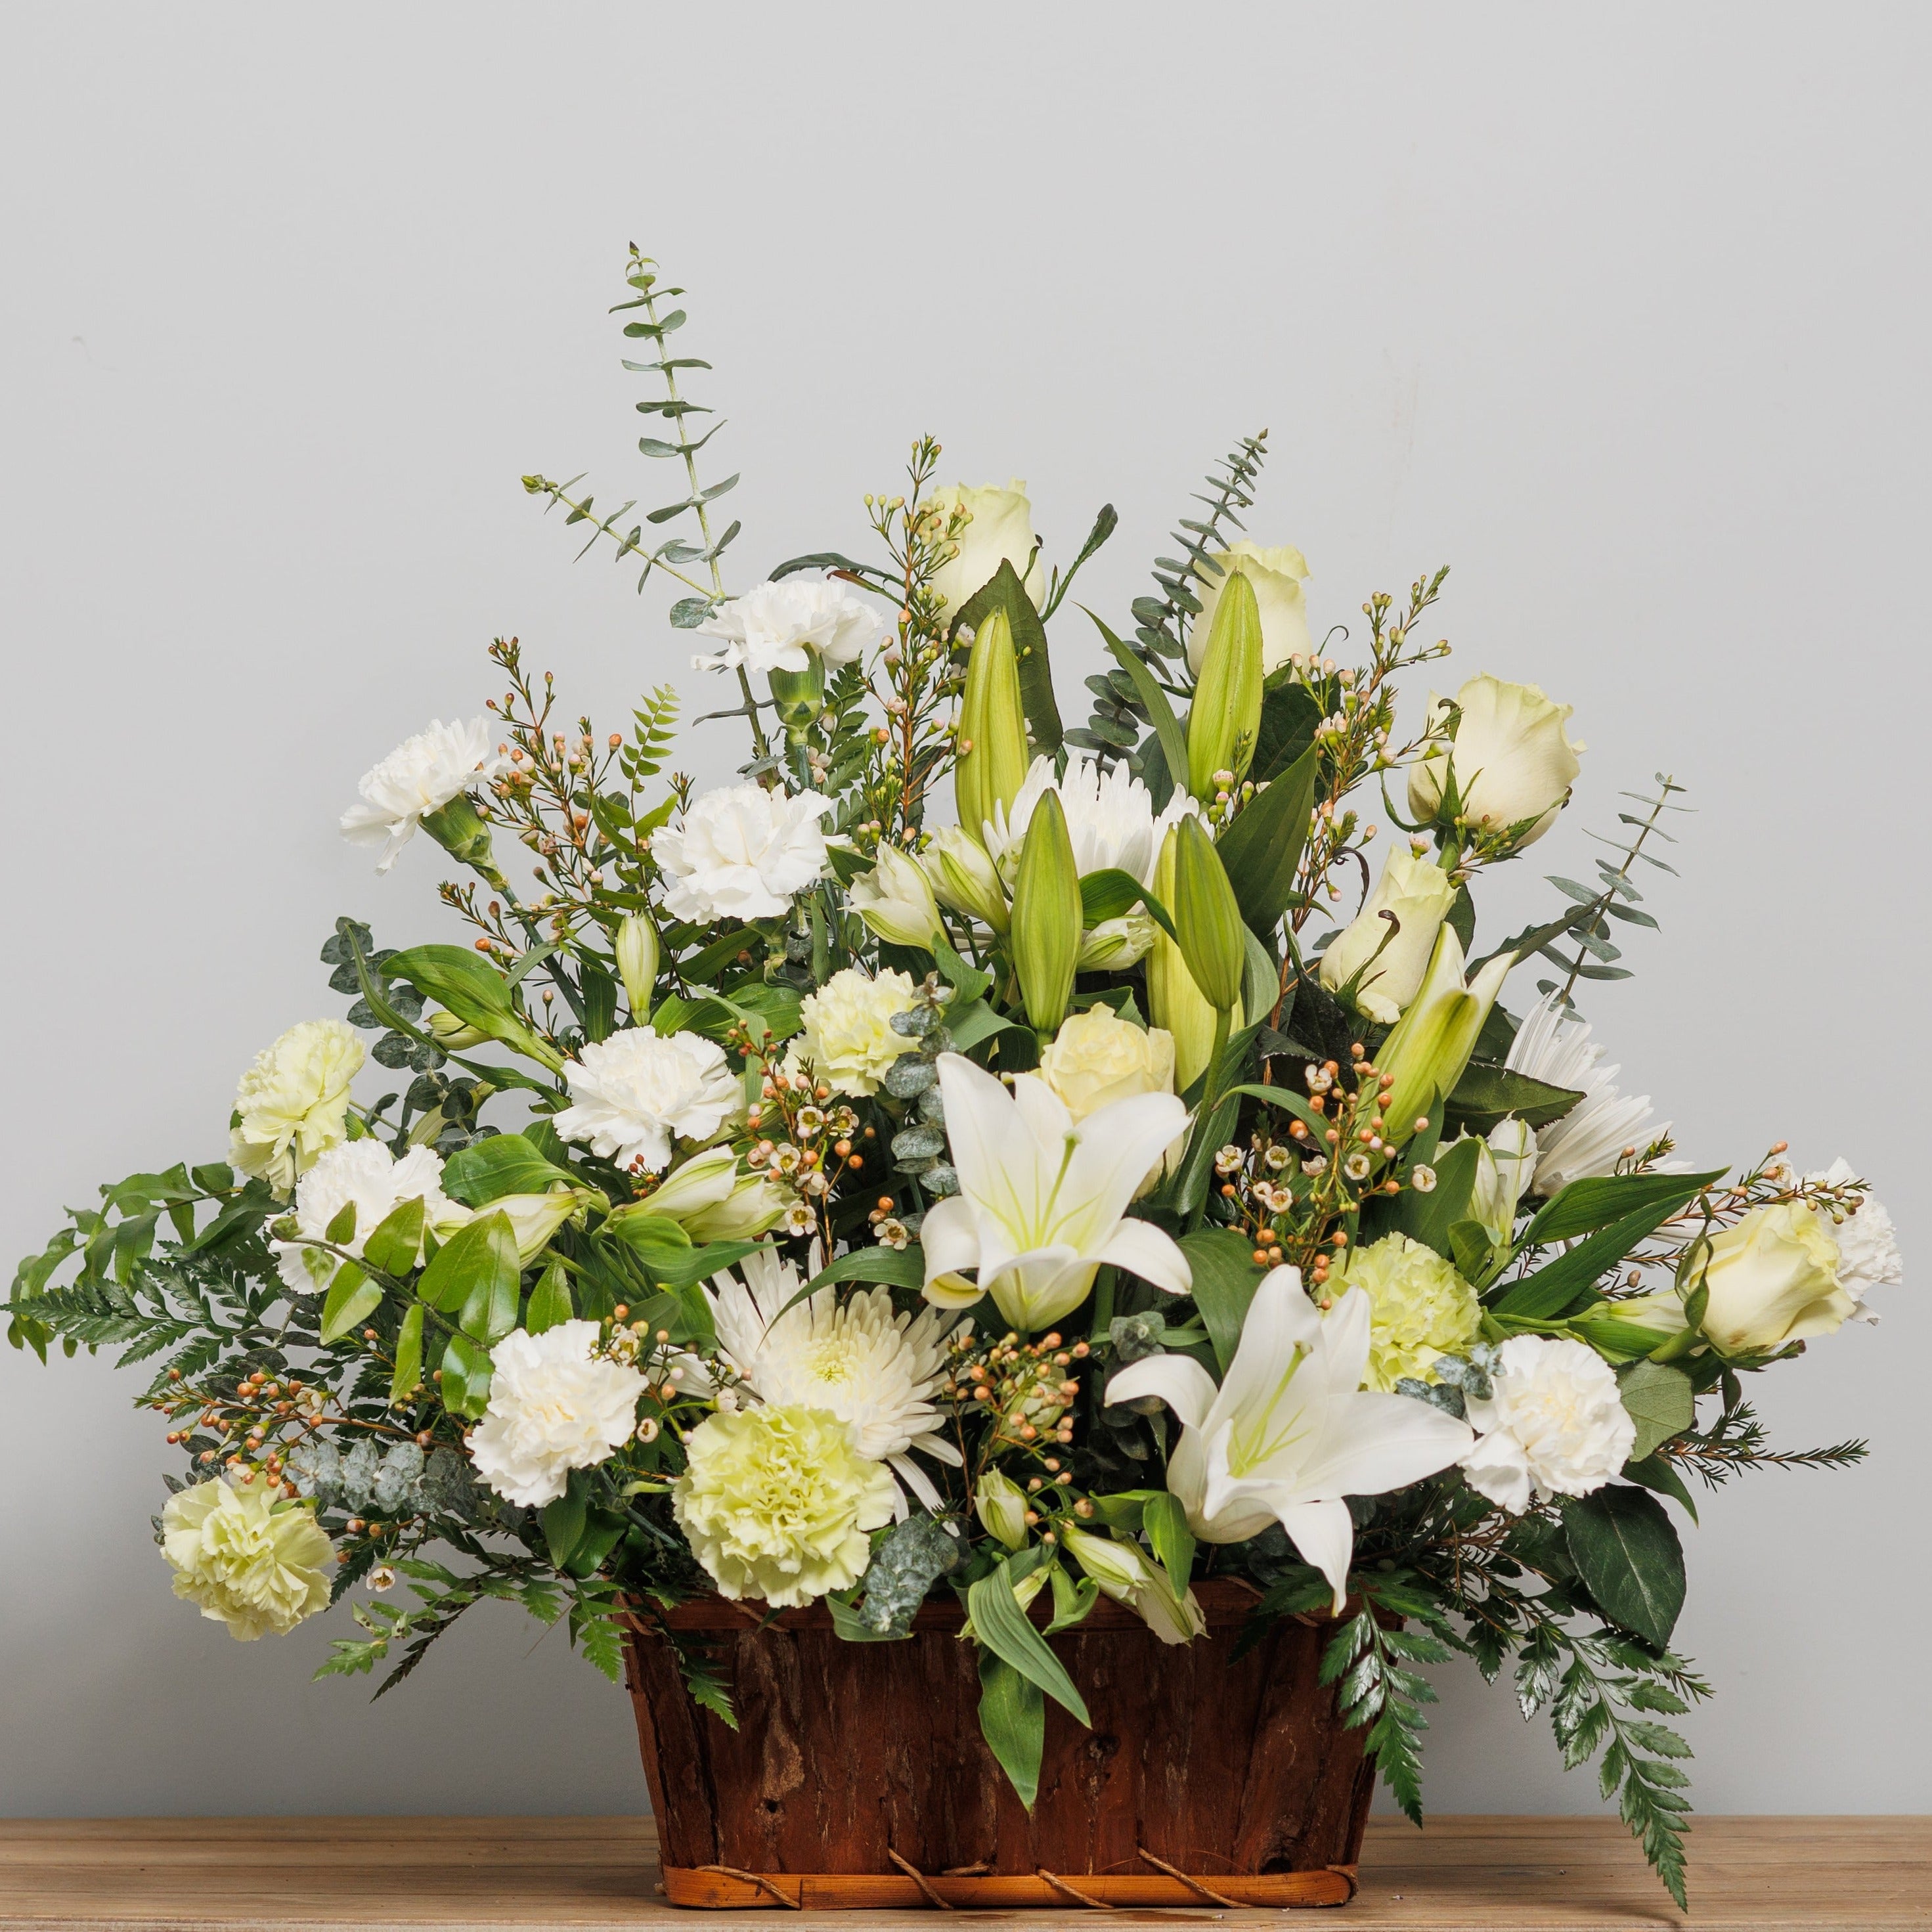 A basket arrangement with green roses and carnations and white lilies.